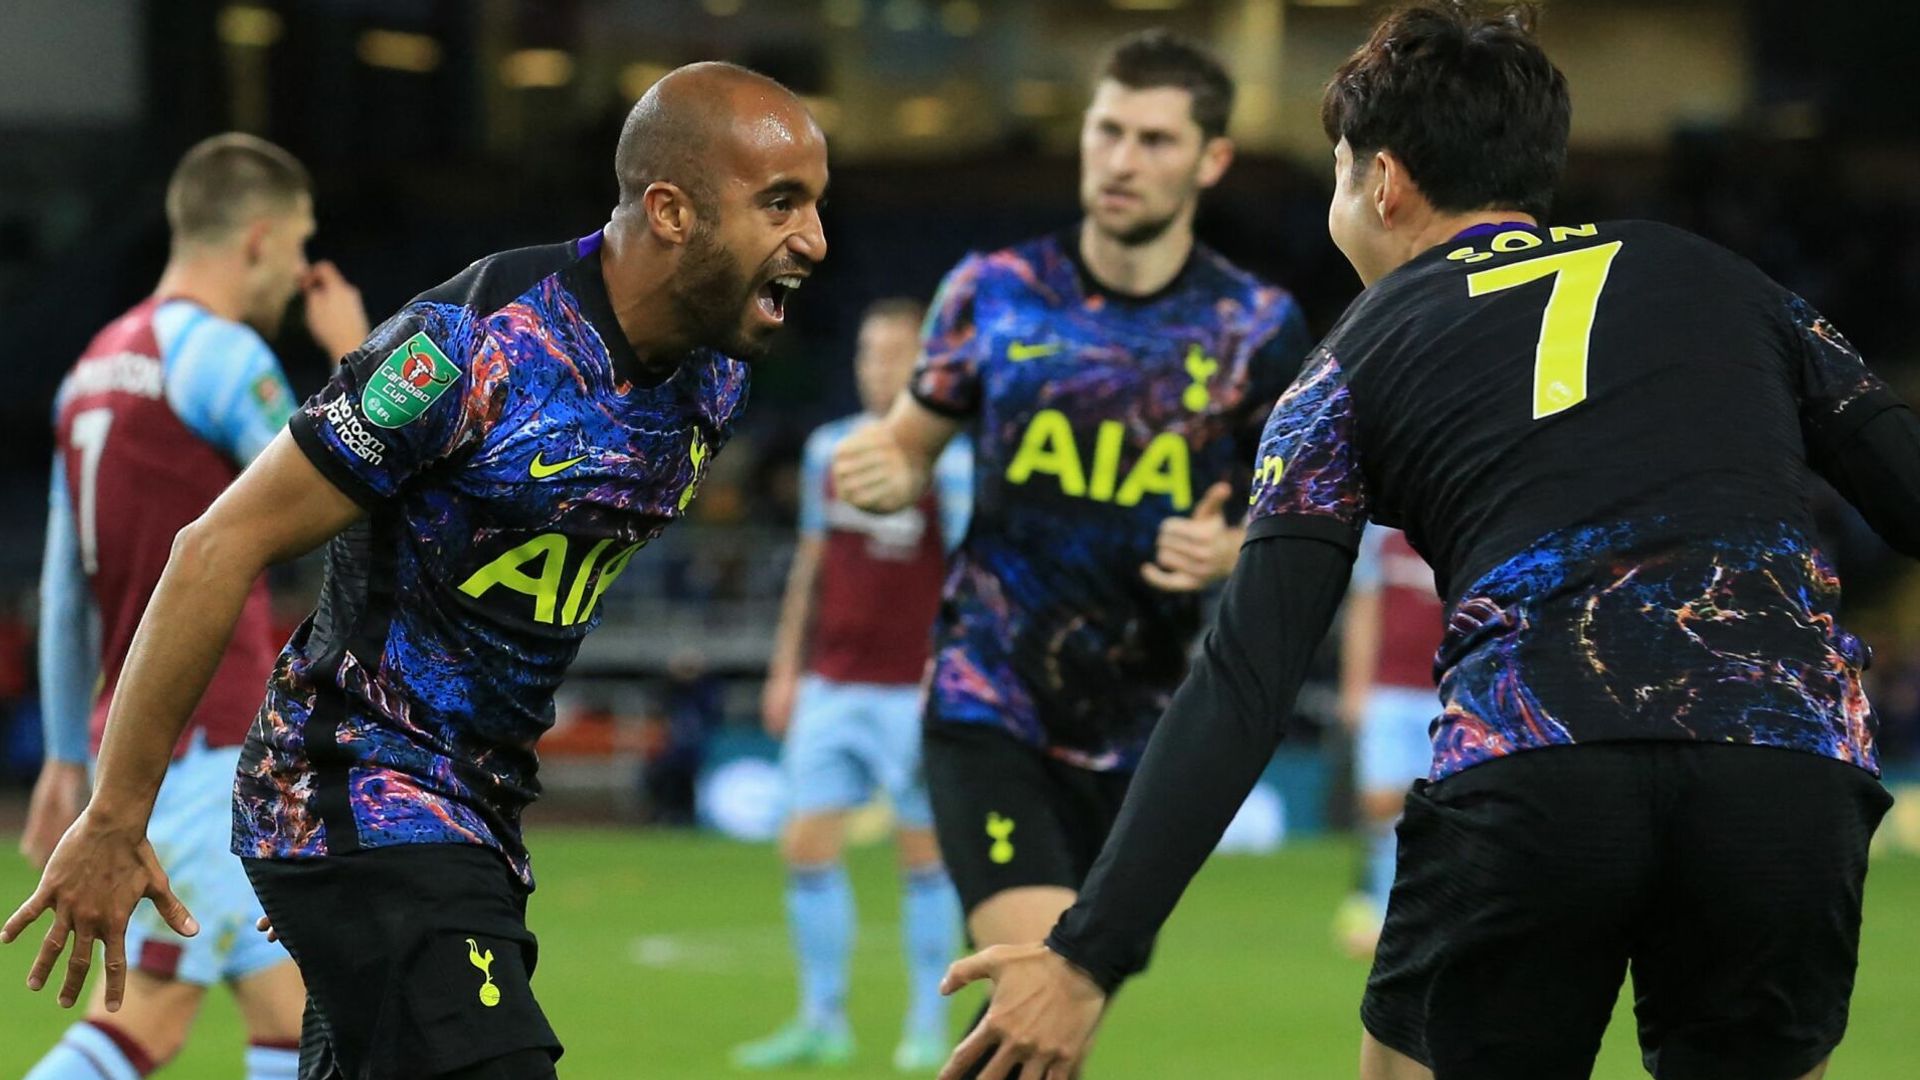 Moura heads Spurs past Burnley and into quarter-finals